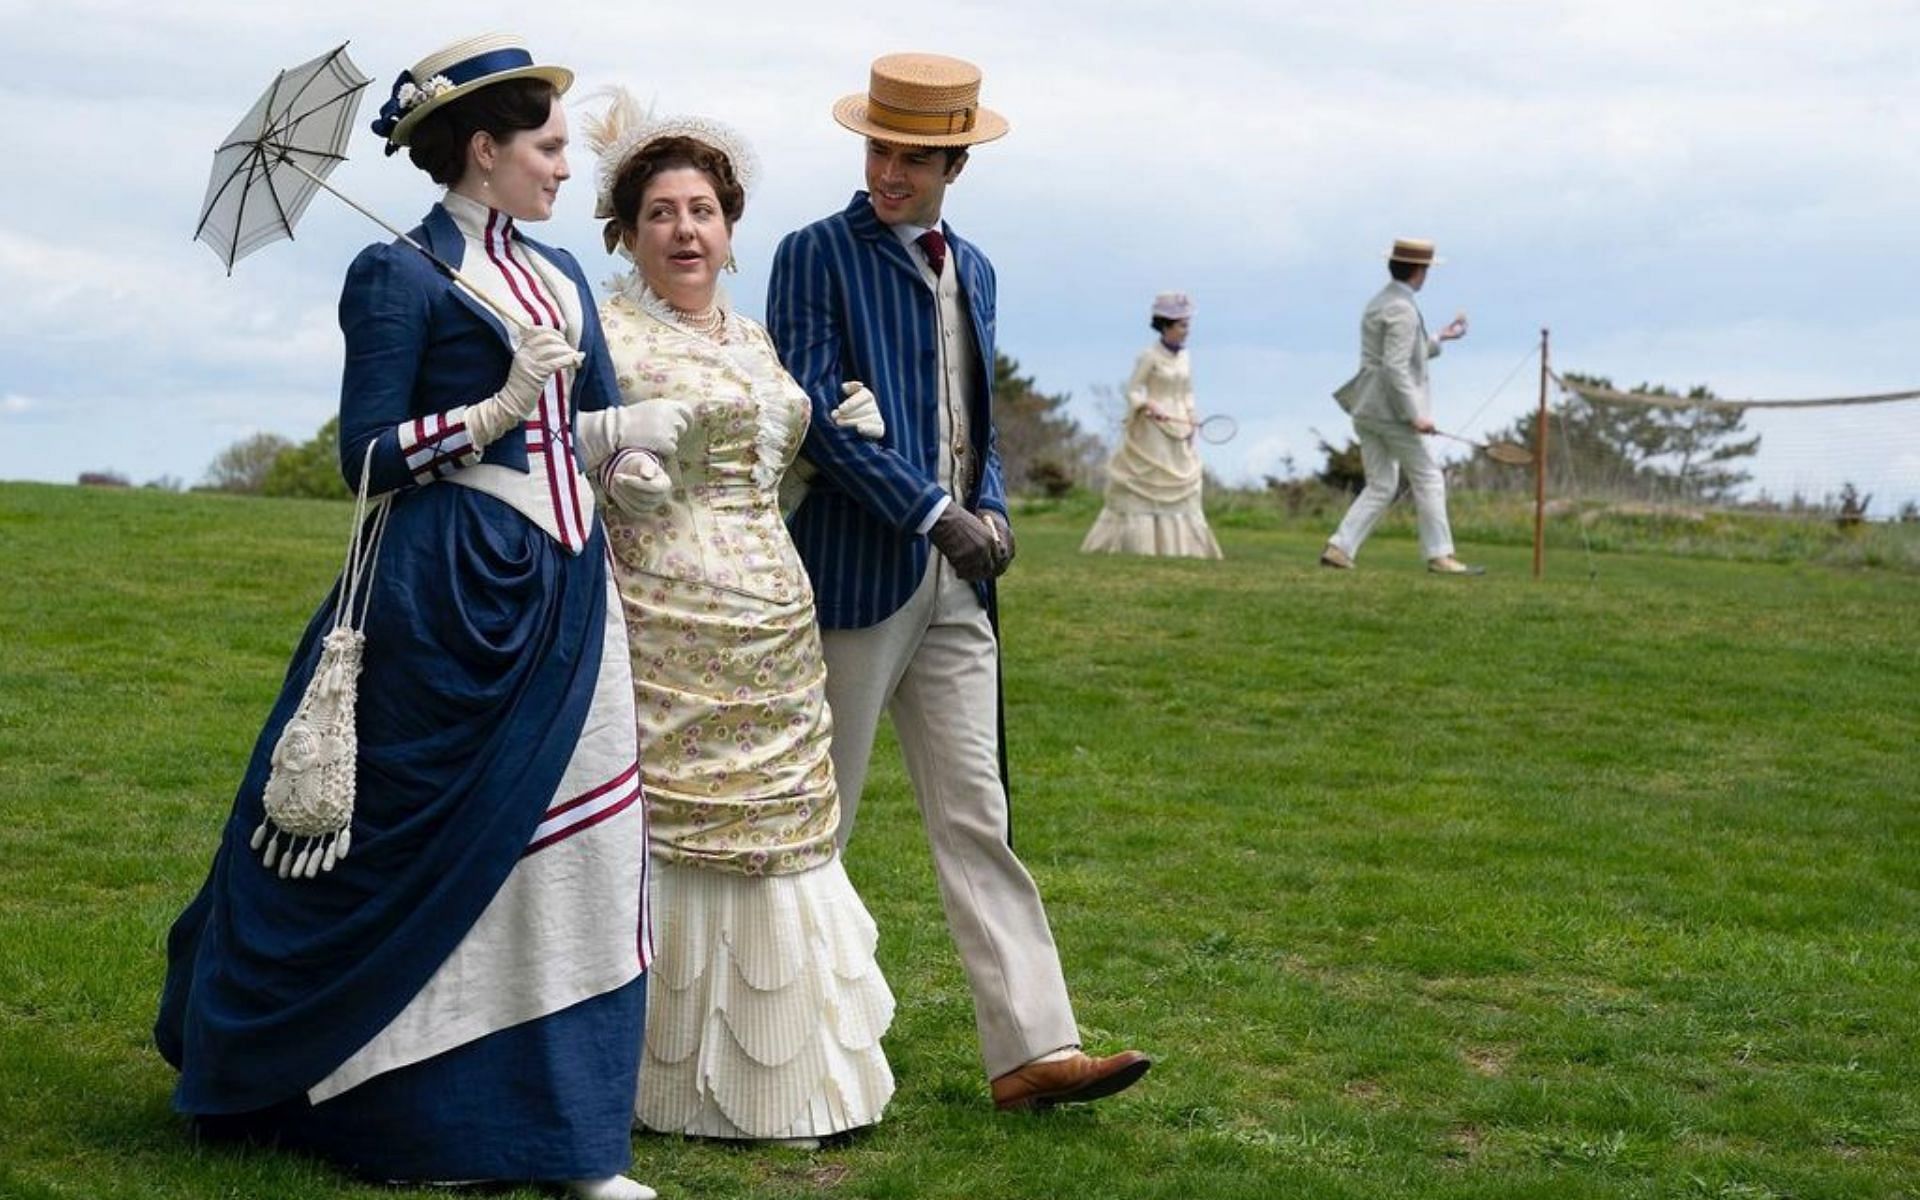 The Gilded Age is a period drama based on the American Gilded Age (Image via gildedagehbo/Instagram)